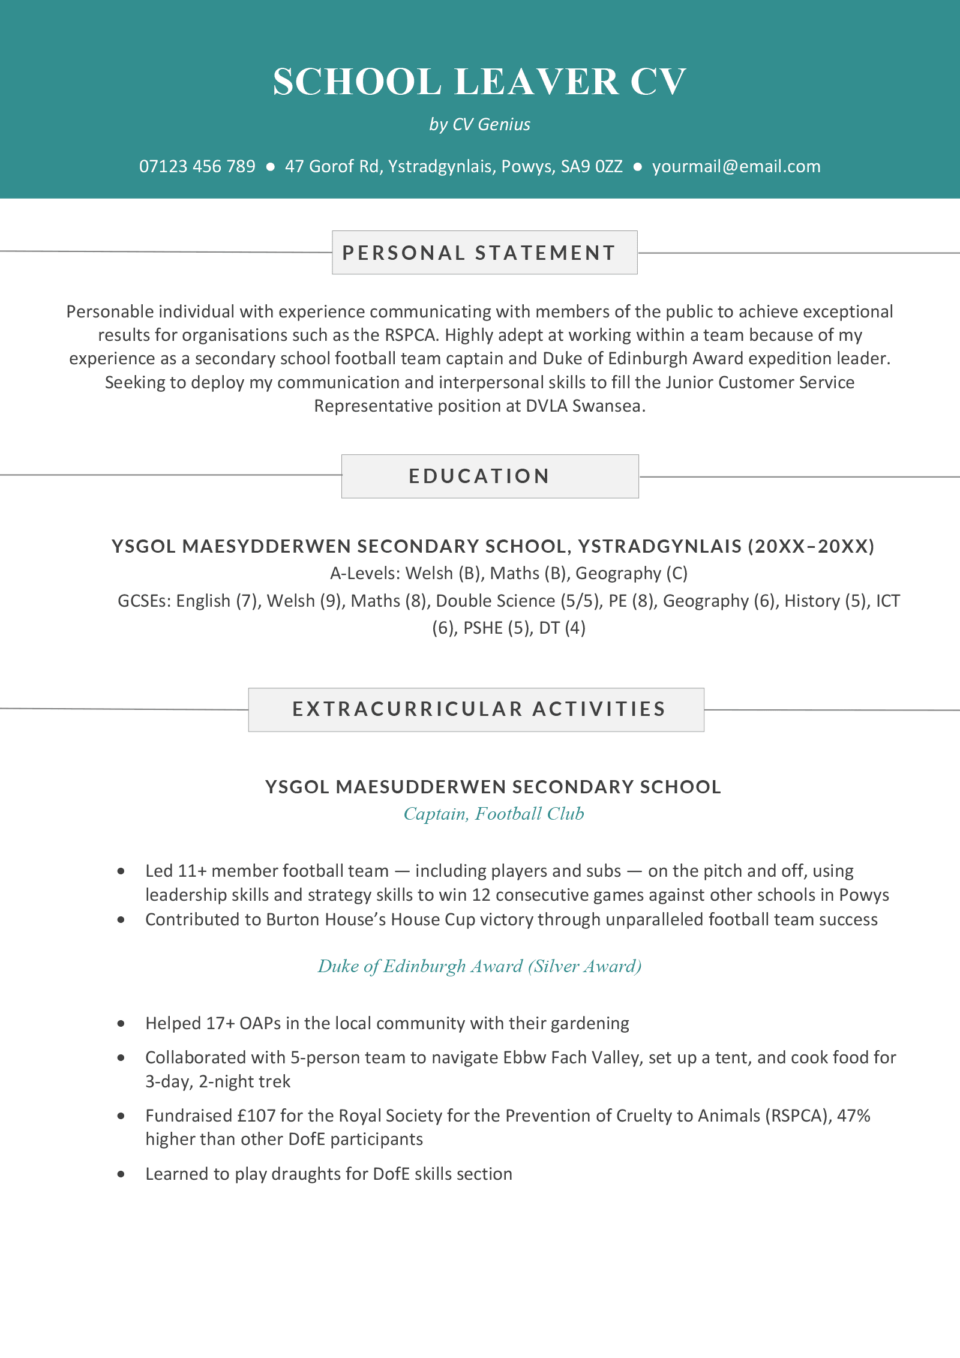 A school leaver CV example on a template with a blue header to accentuate the applicant's name and contact information.